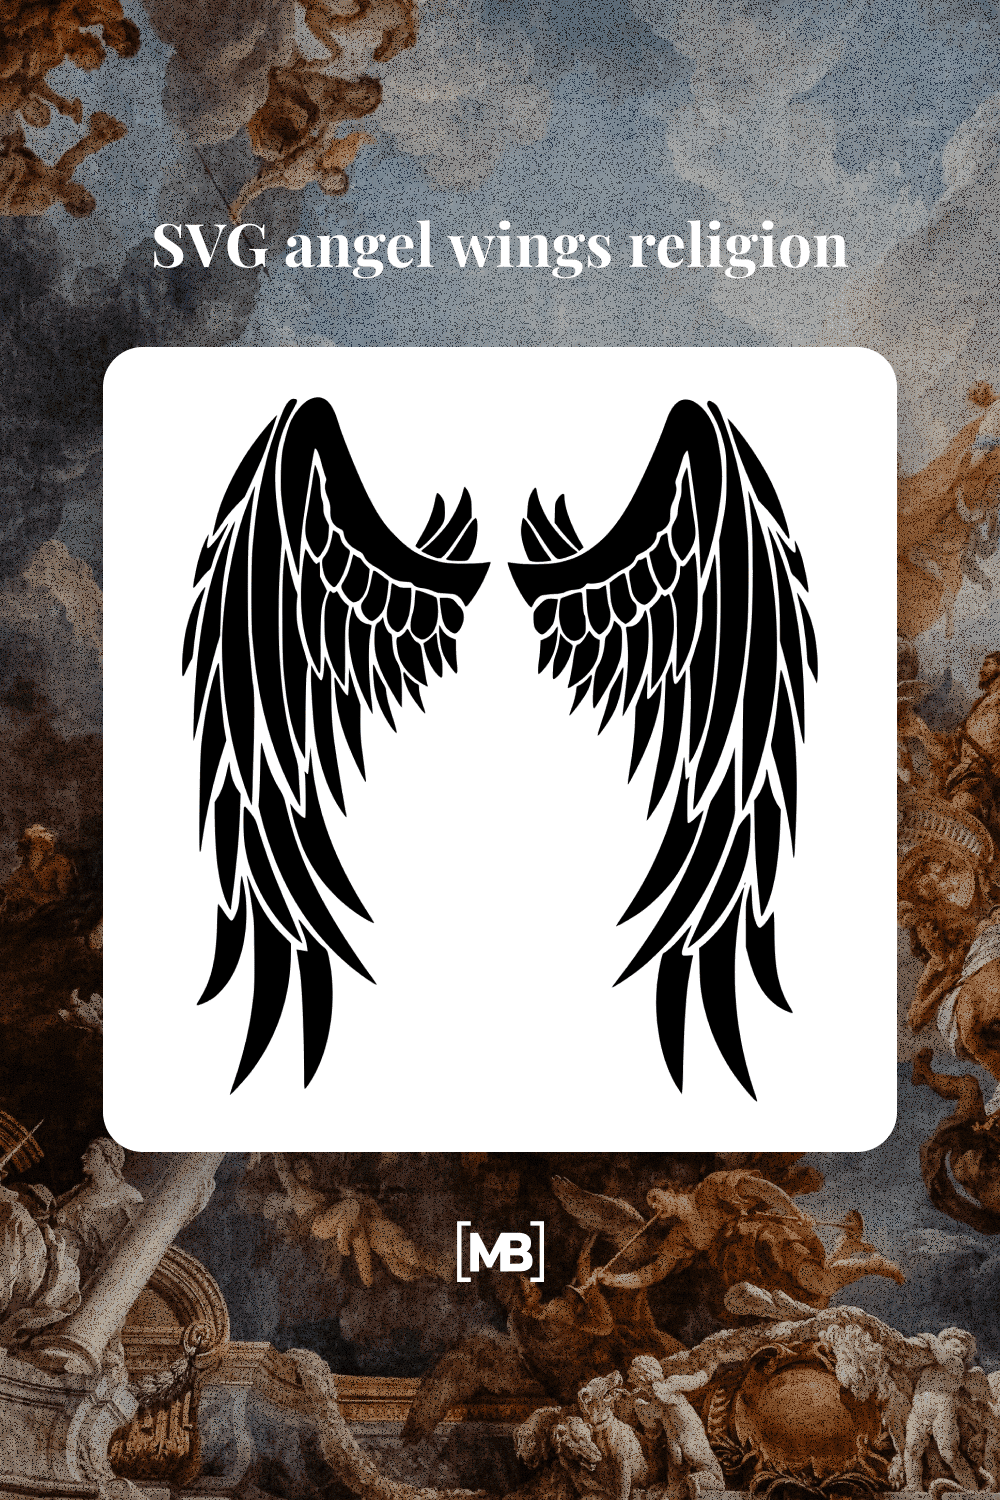 SVG angel wings religion.